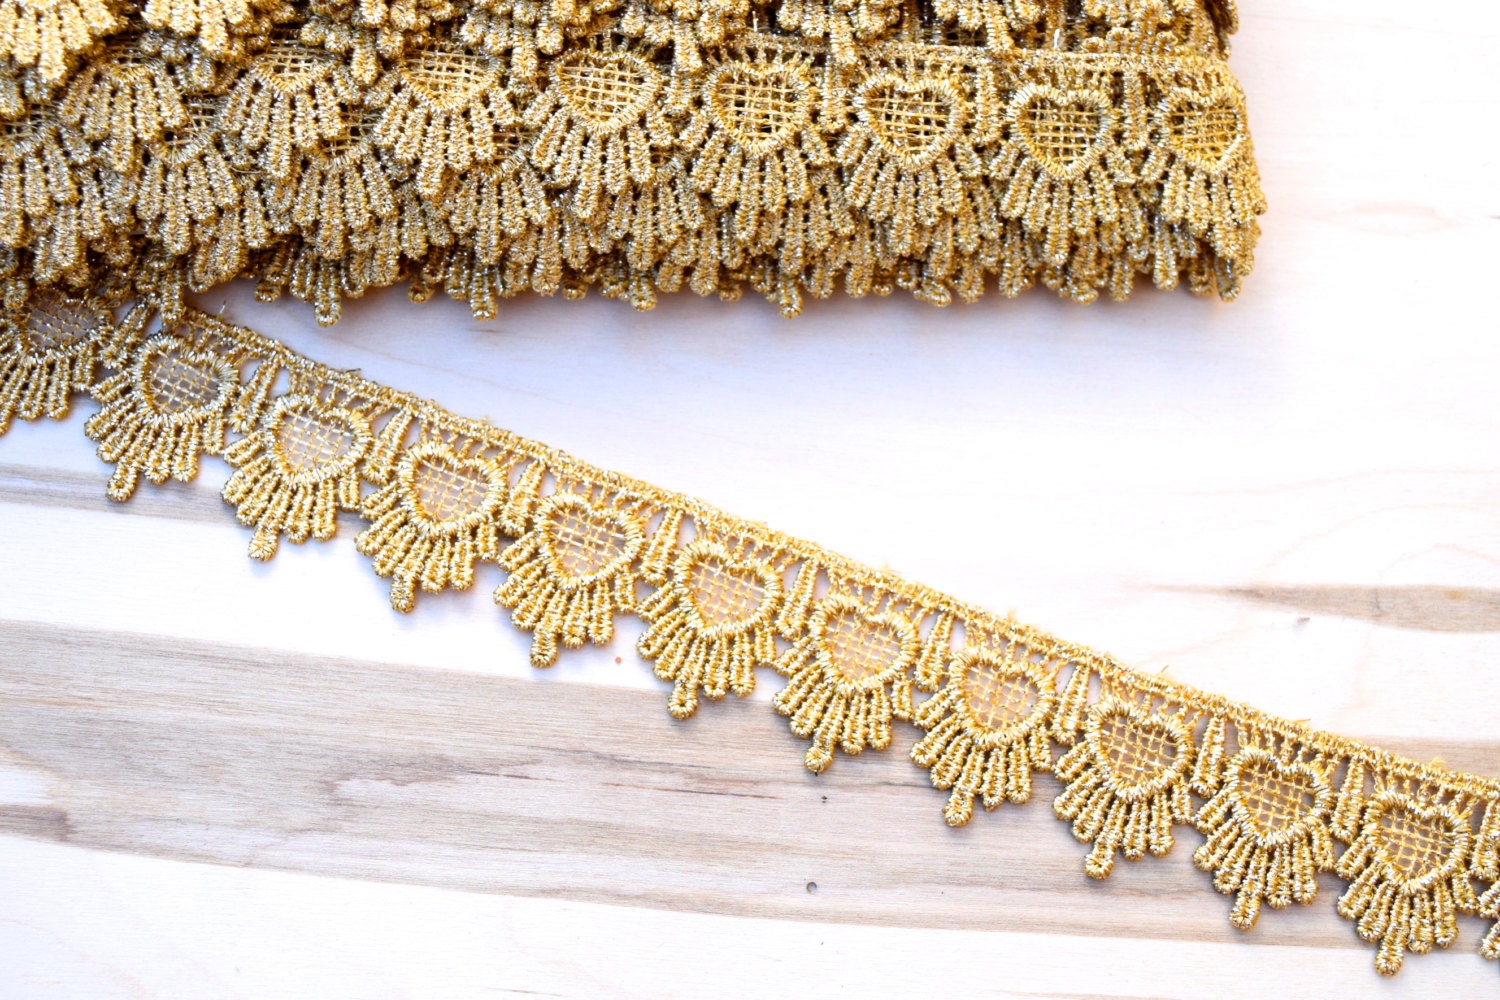 Gold Lace Trim Nynette Delightfully Narrow Metallic Gold Venice Lace in  Repeated Heart Shape 1.5 Perfect for Gowns, Costumes Home Decor 